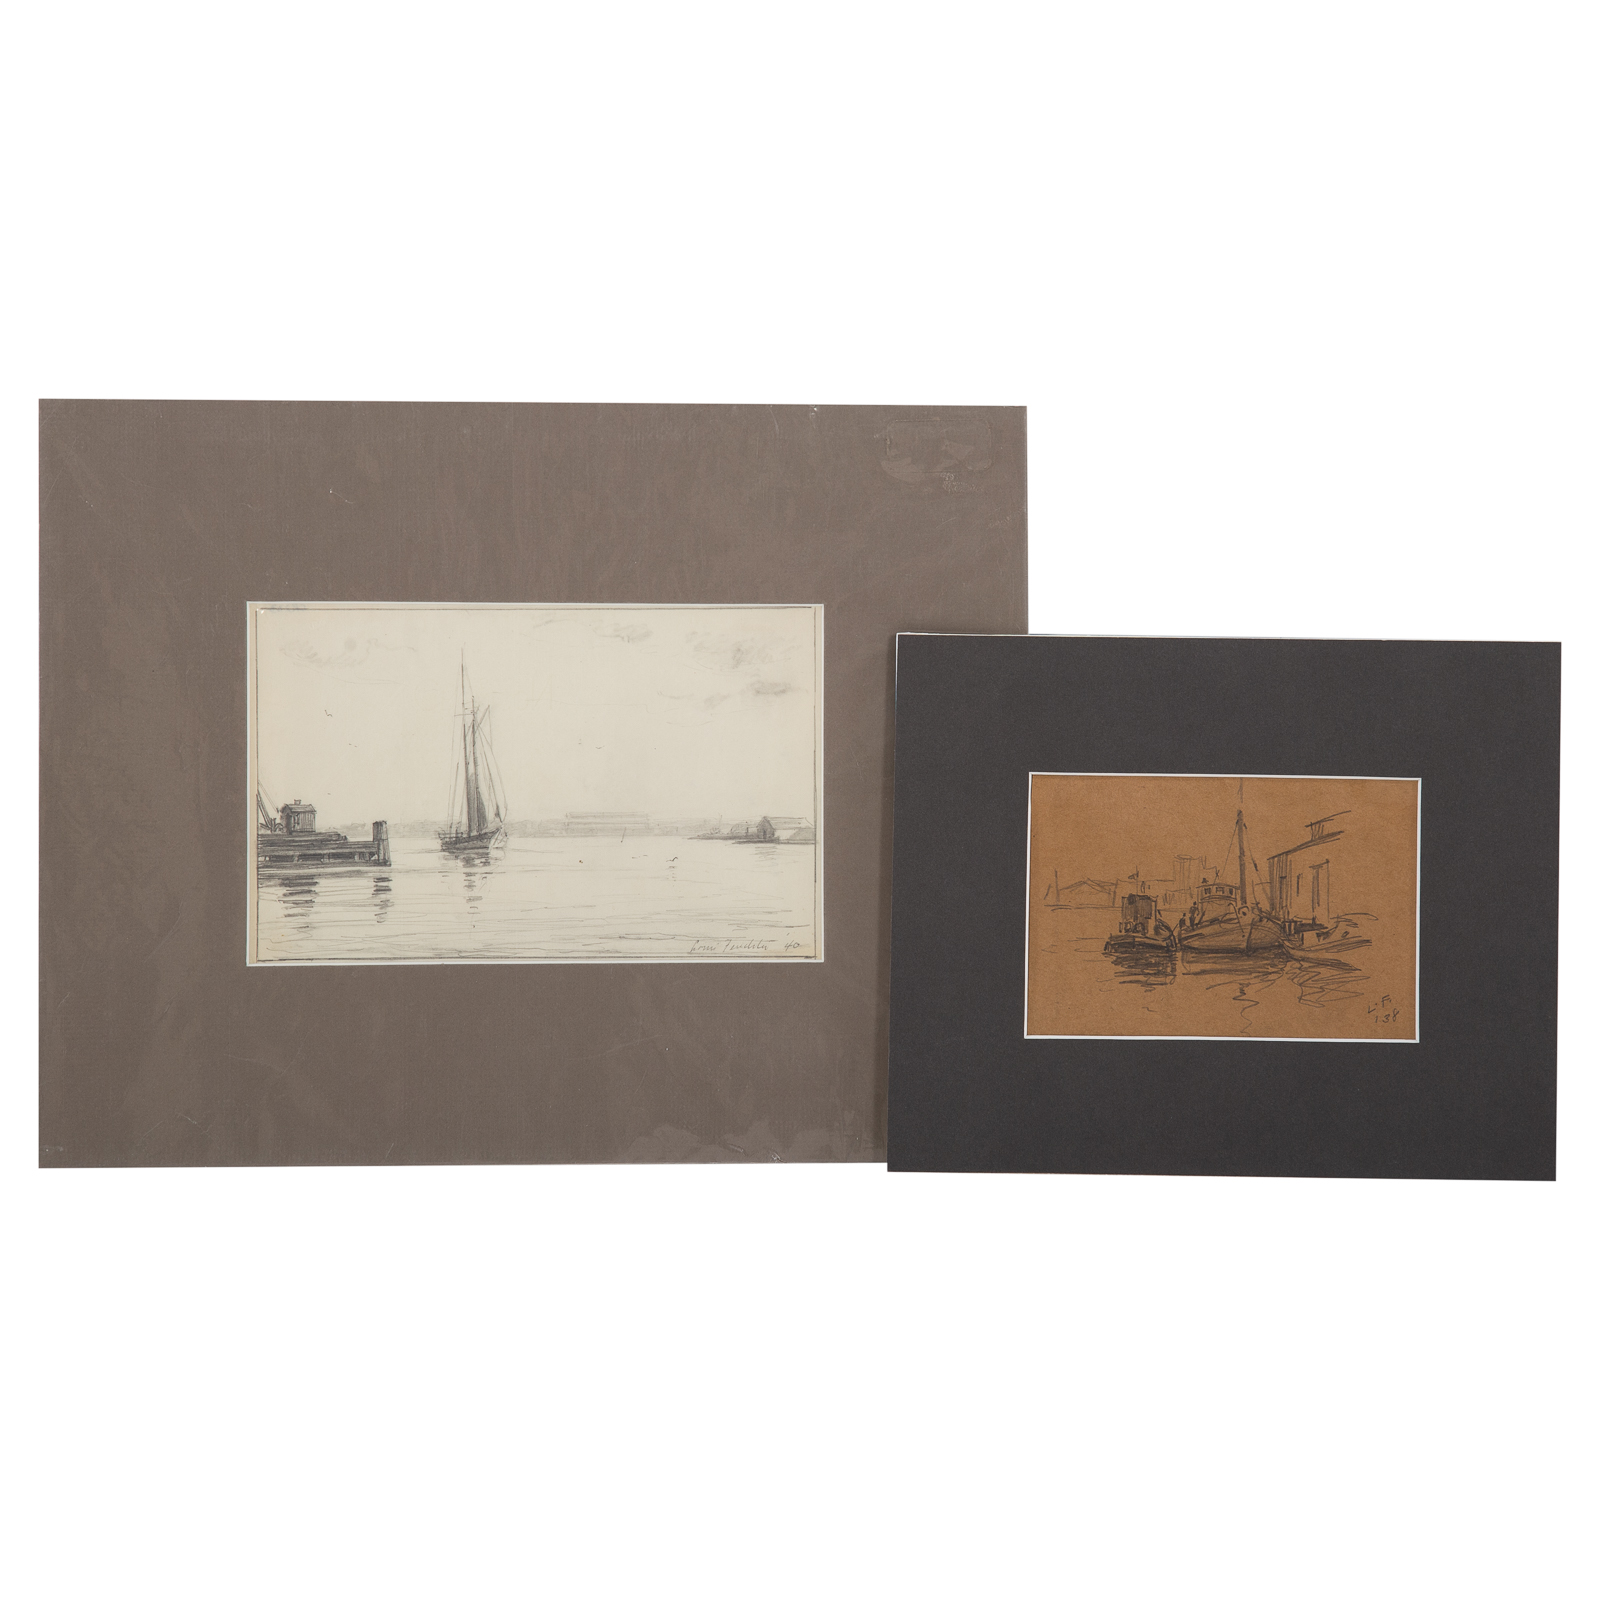 LOUIS FEUCHTER TWO GRAPHITE DRAWINGS 338848